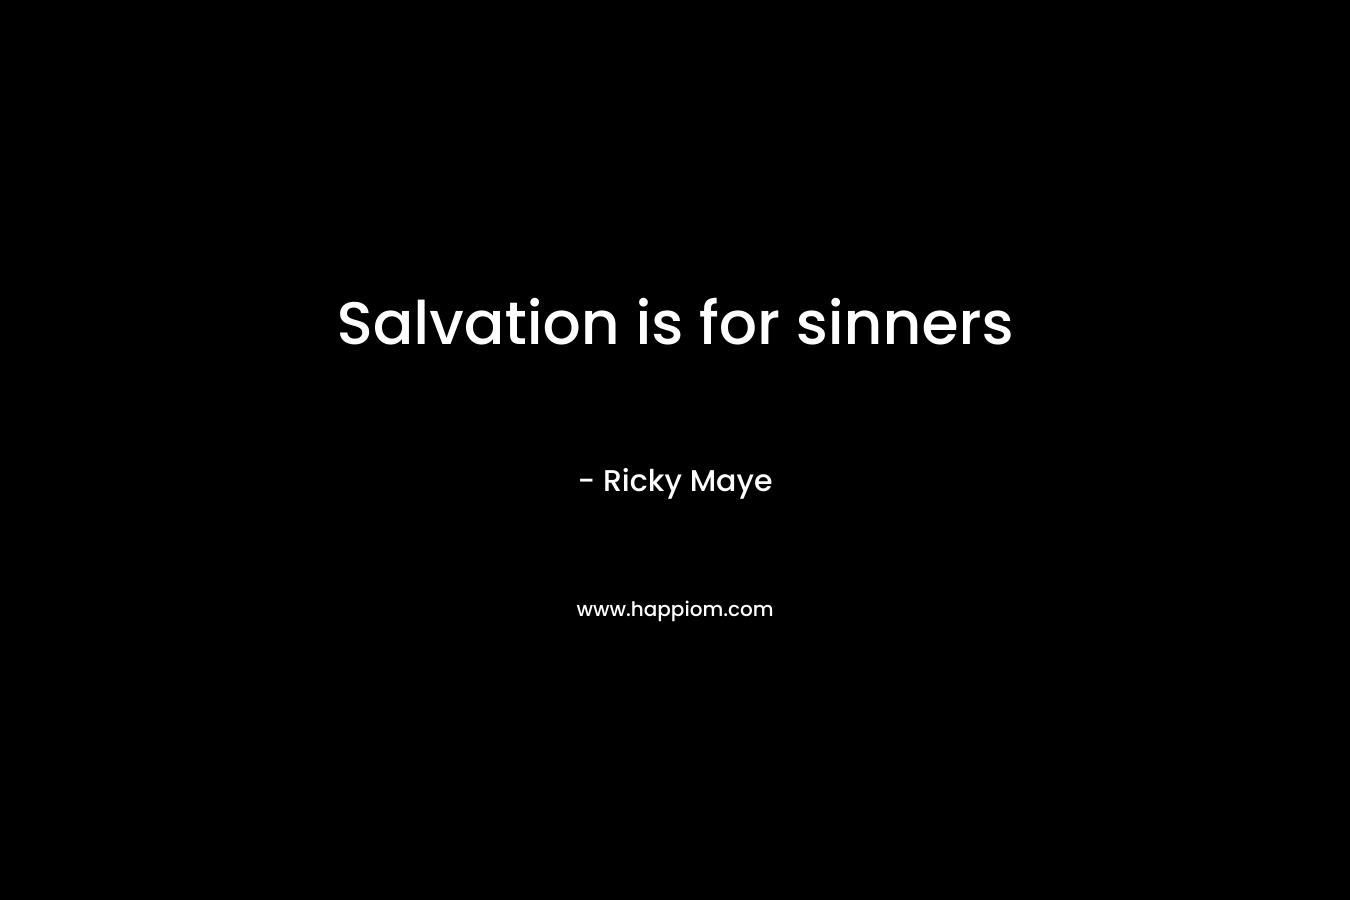 Salvation is for sinners